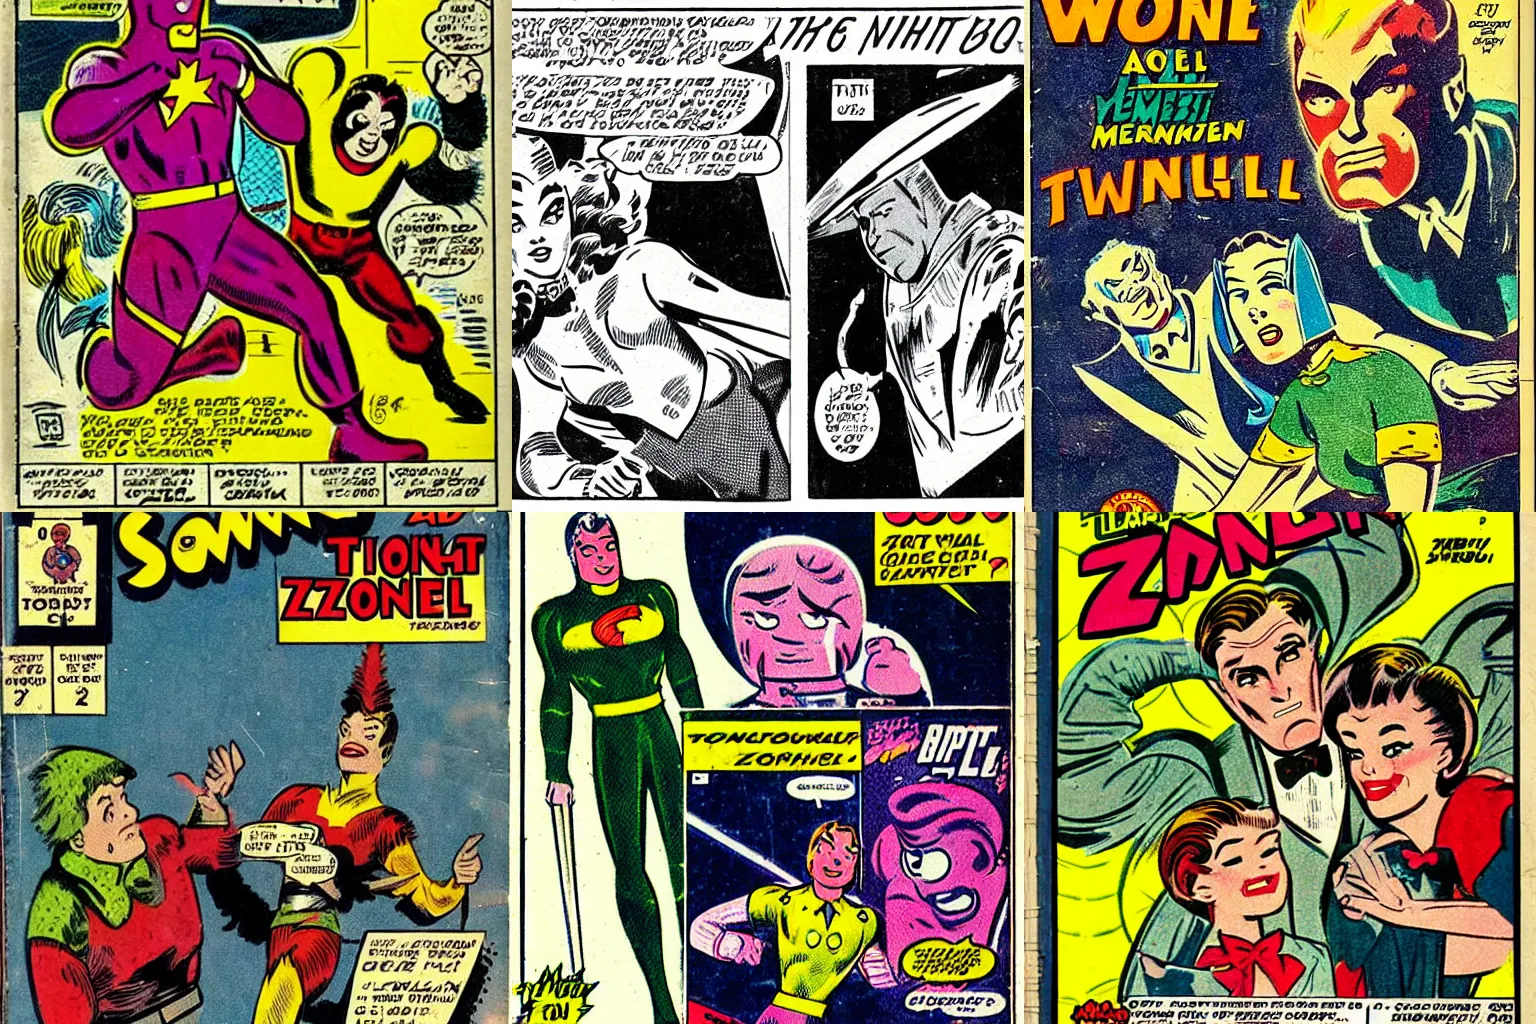 Prompt: a vintage comic book about The Twilight Zonel